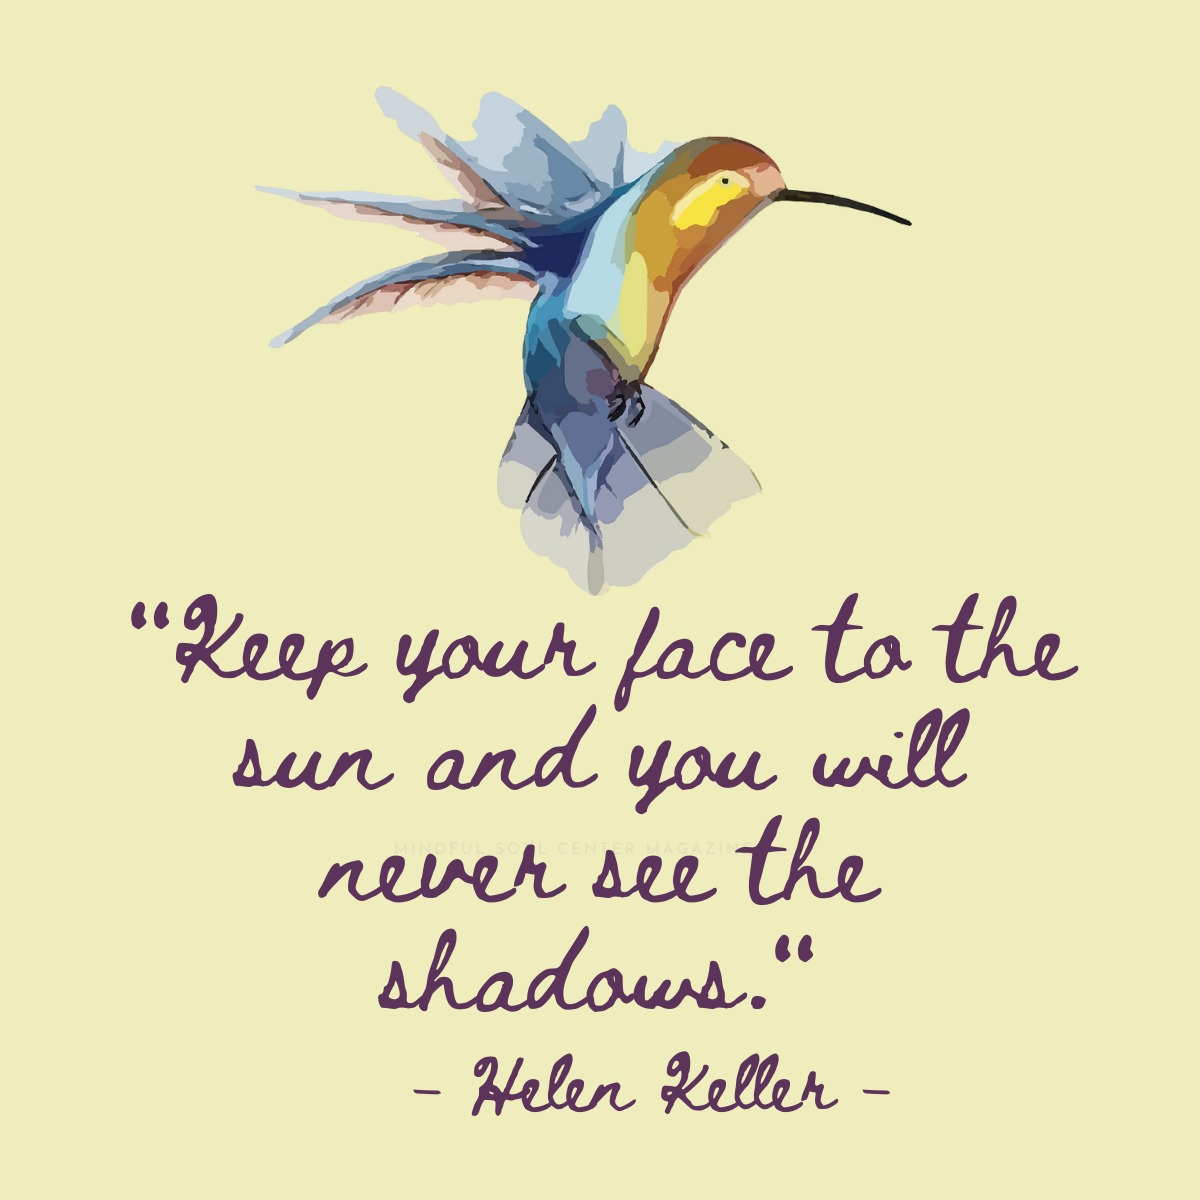 Keep your face to the sun quote - helen keller mindful soul center magazine